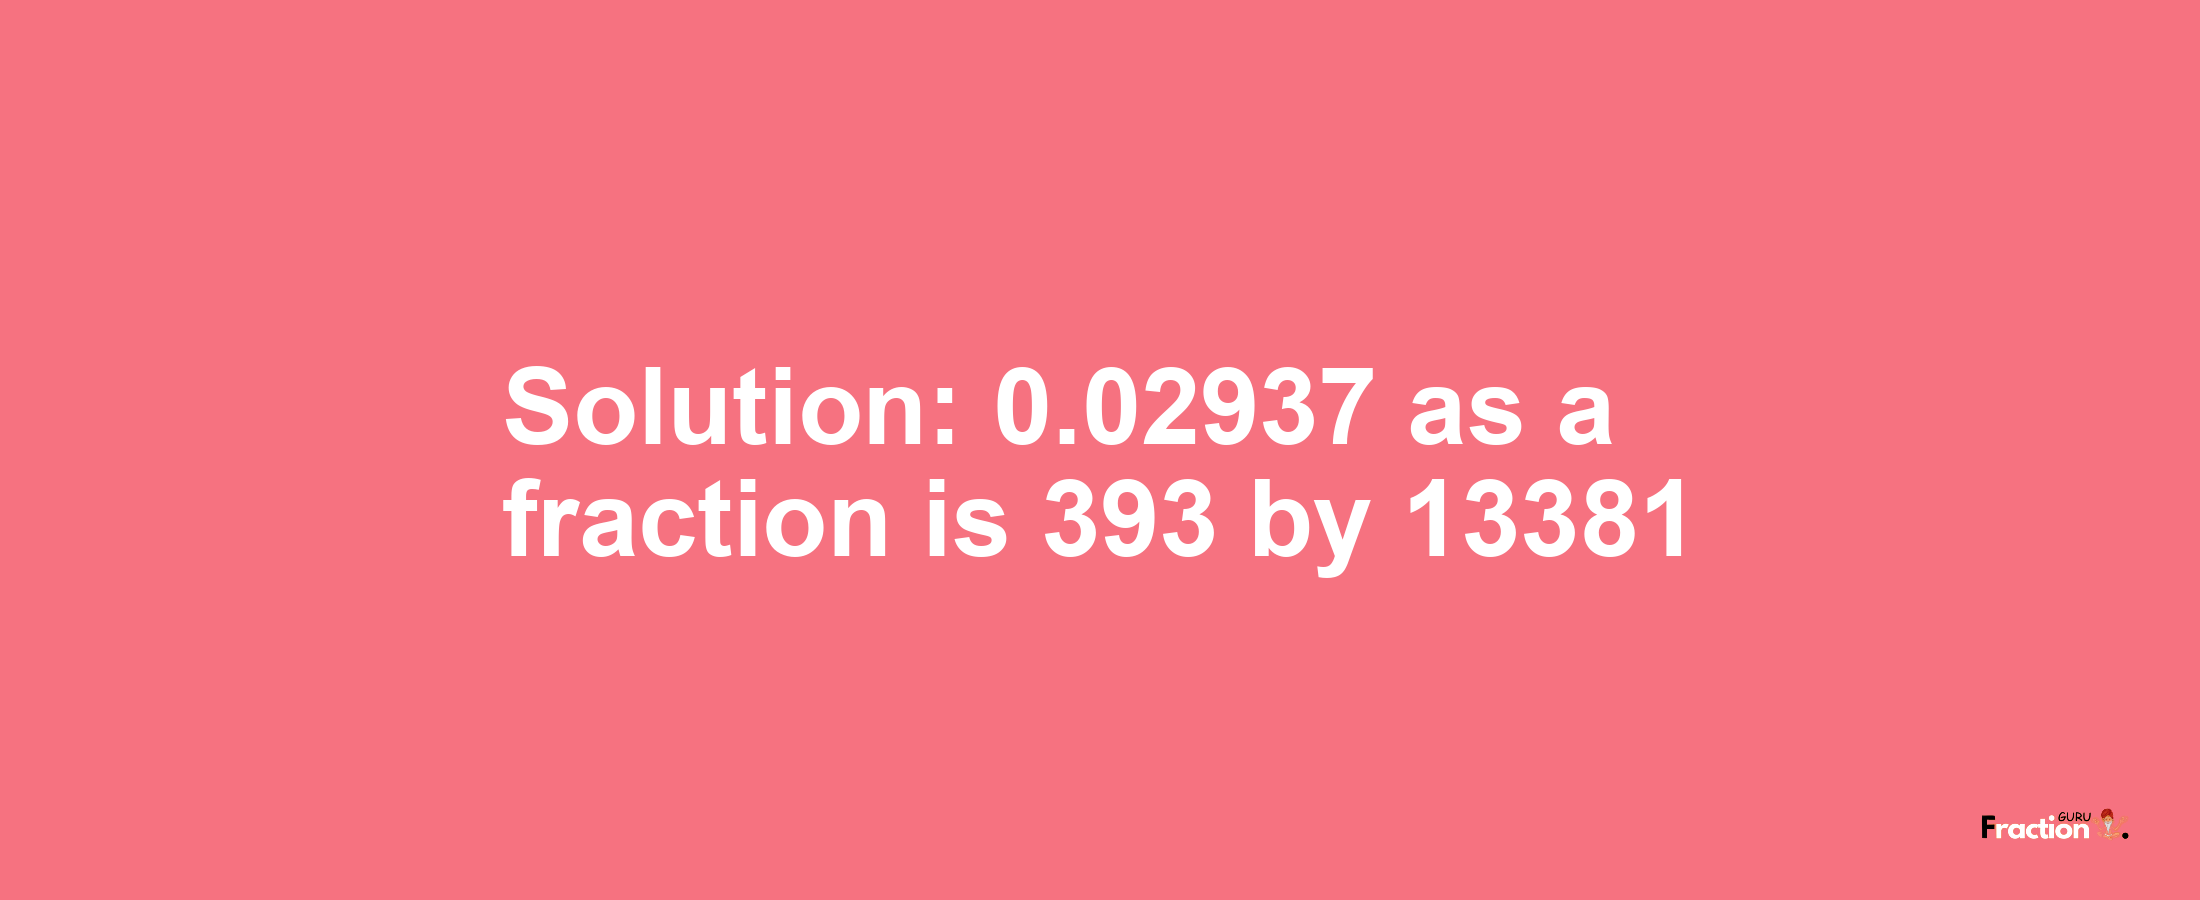 Solution:0.02937 as a fraction is 393/13381